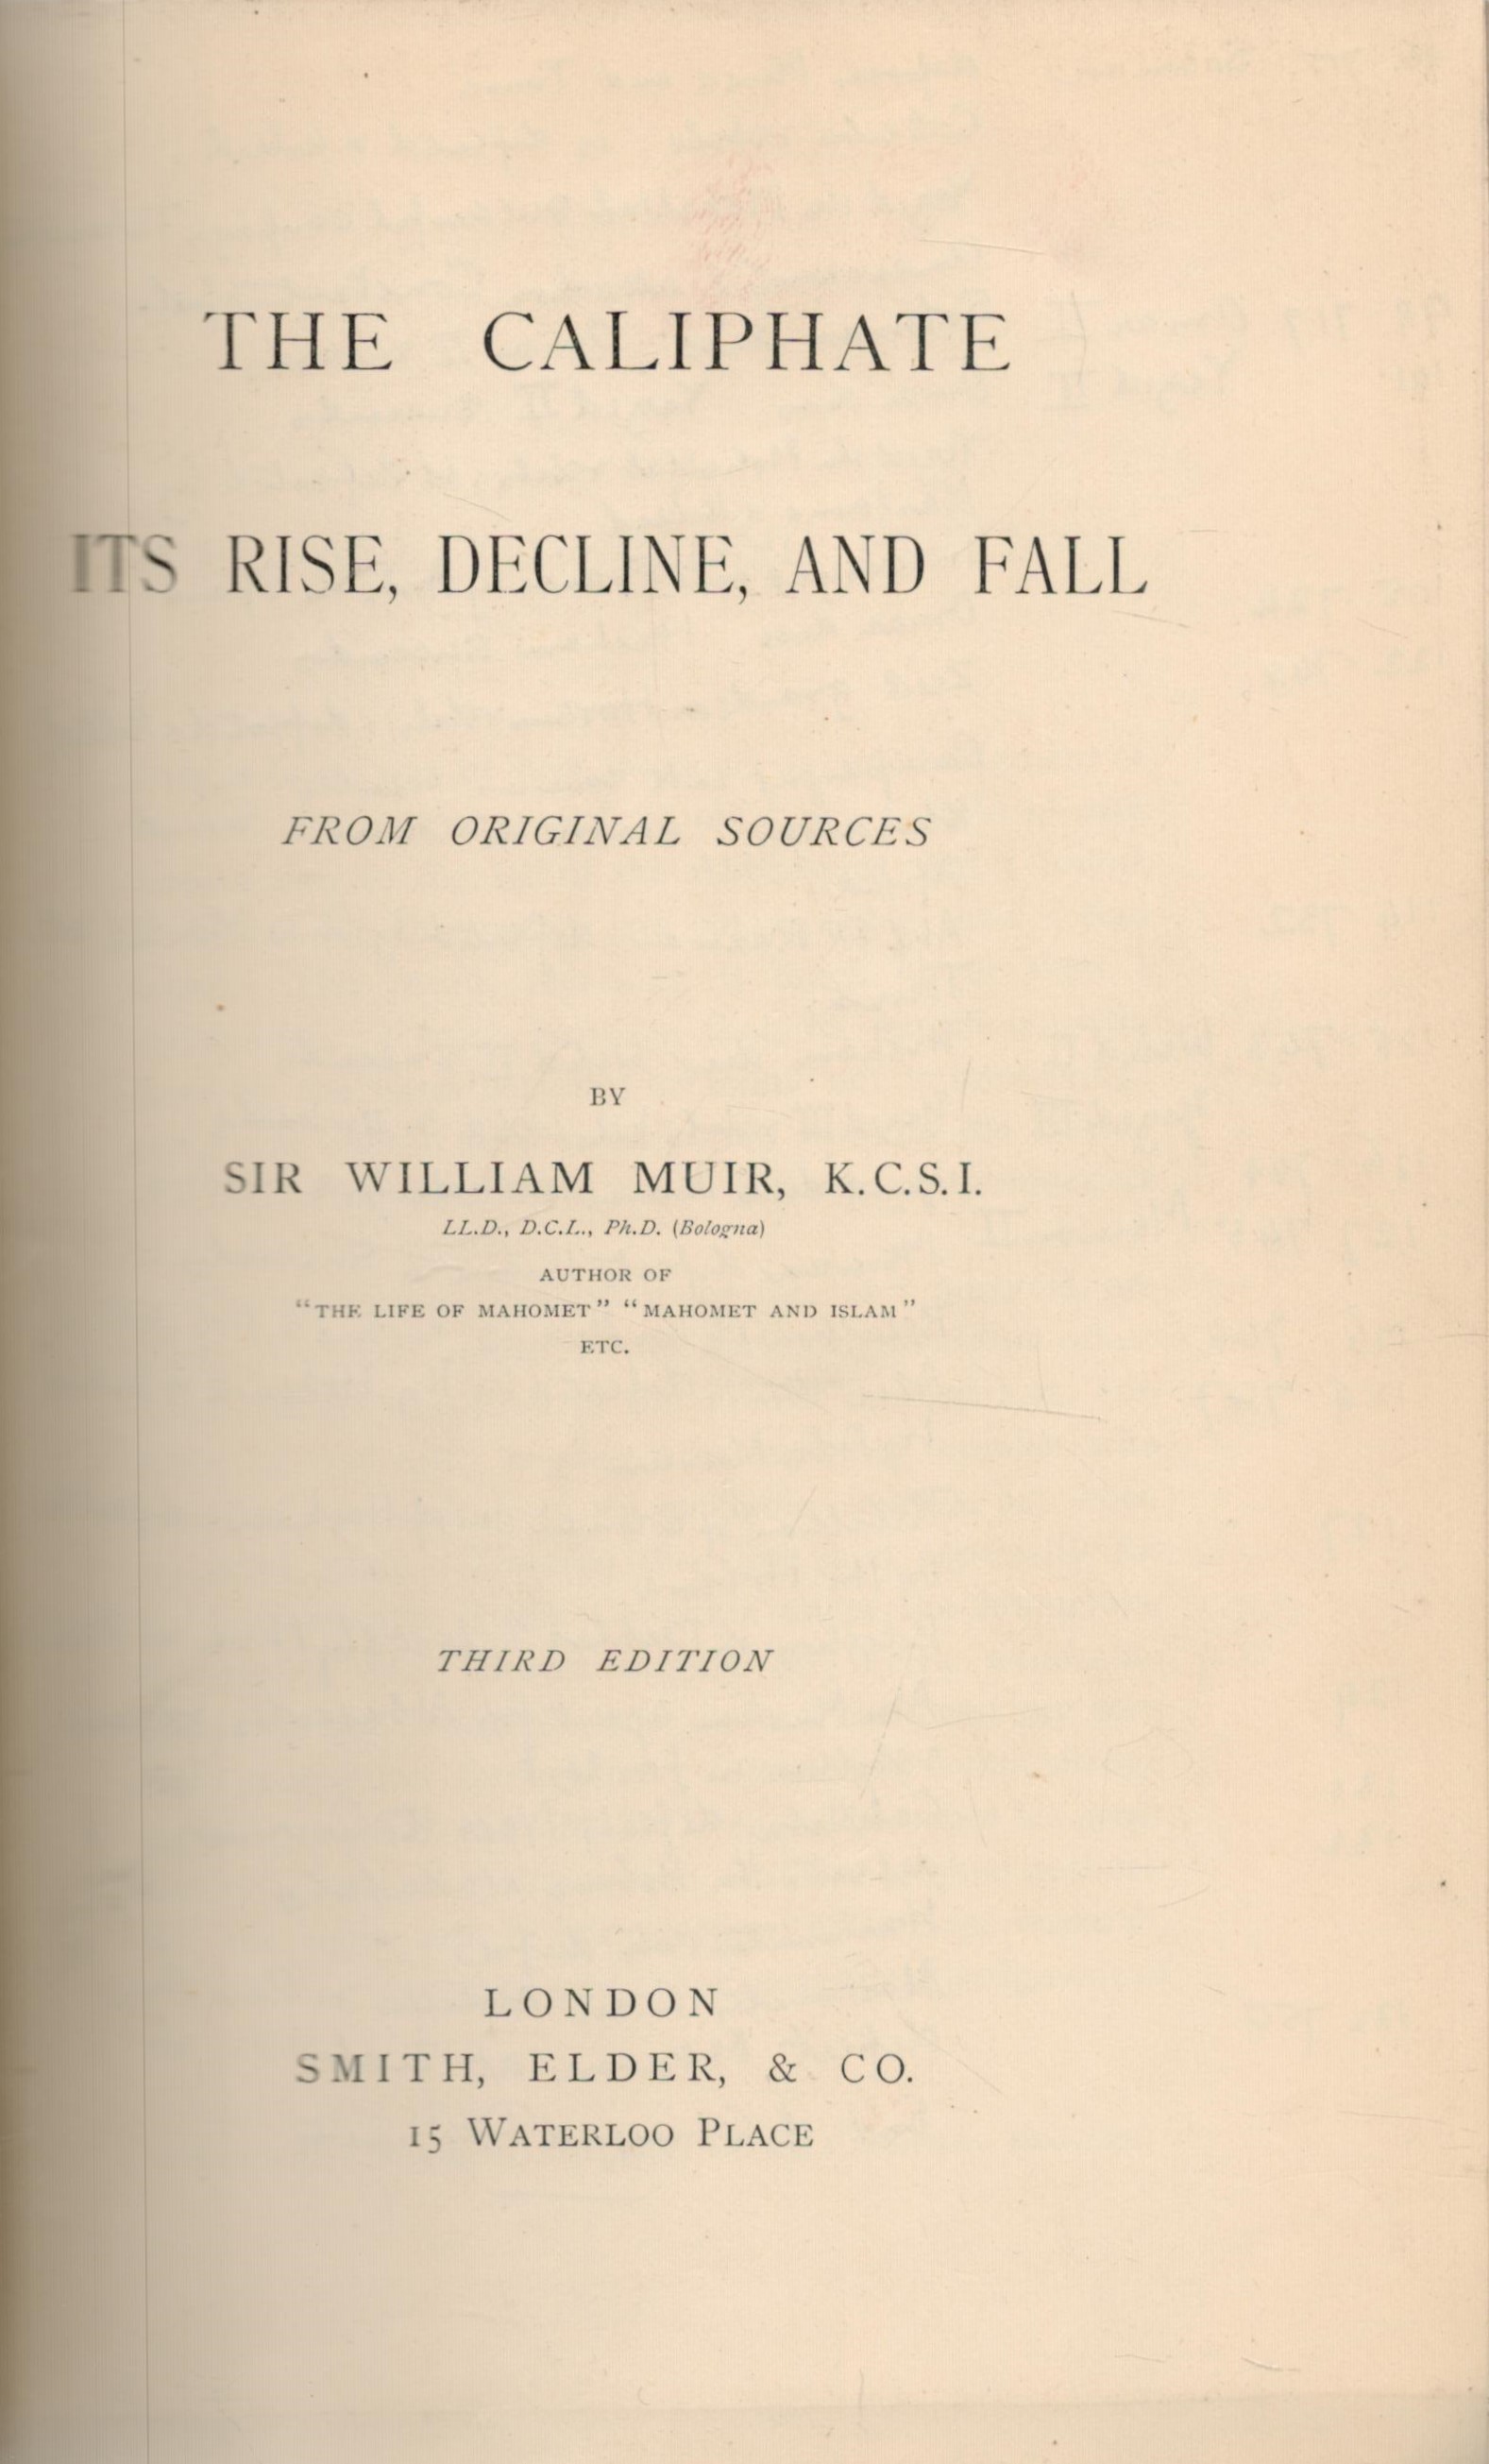 The Caliphate - Its Rise, Decline, and Fall by Sir William Muir Third Edition date unknown - Image 2 of 2